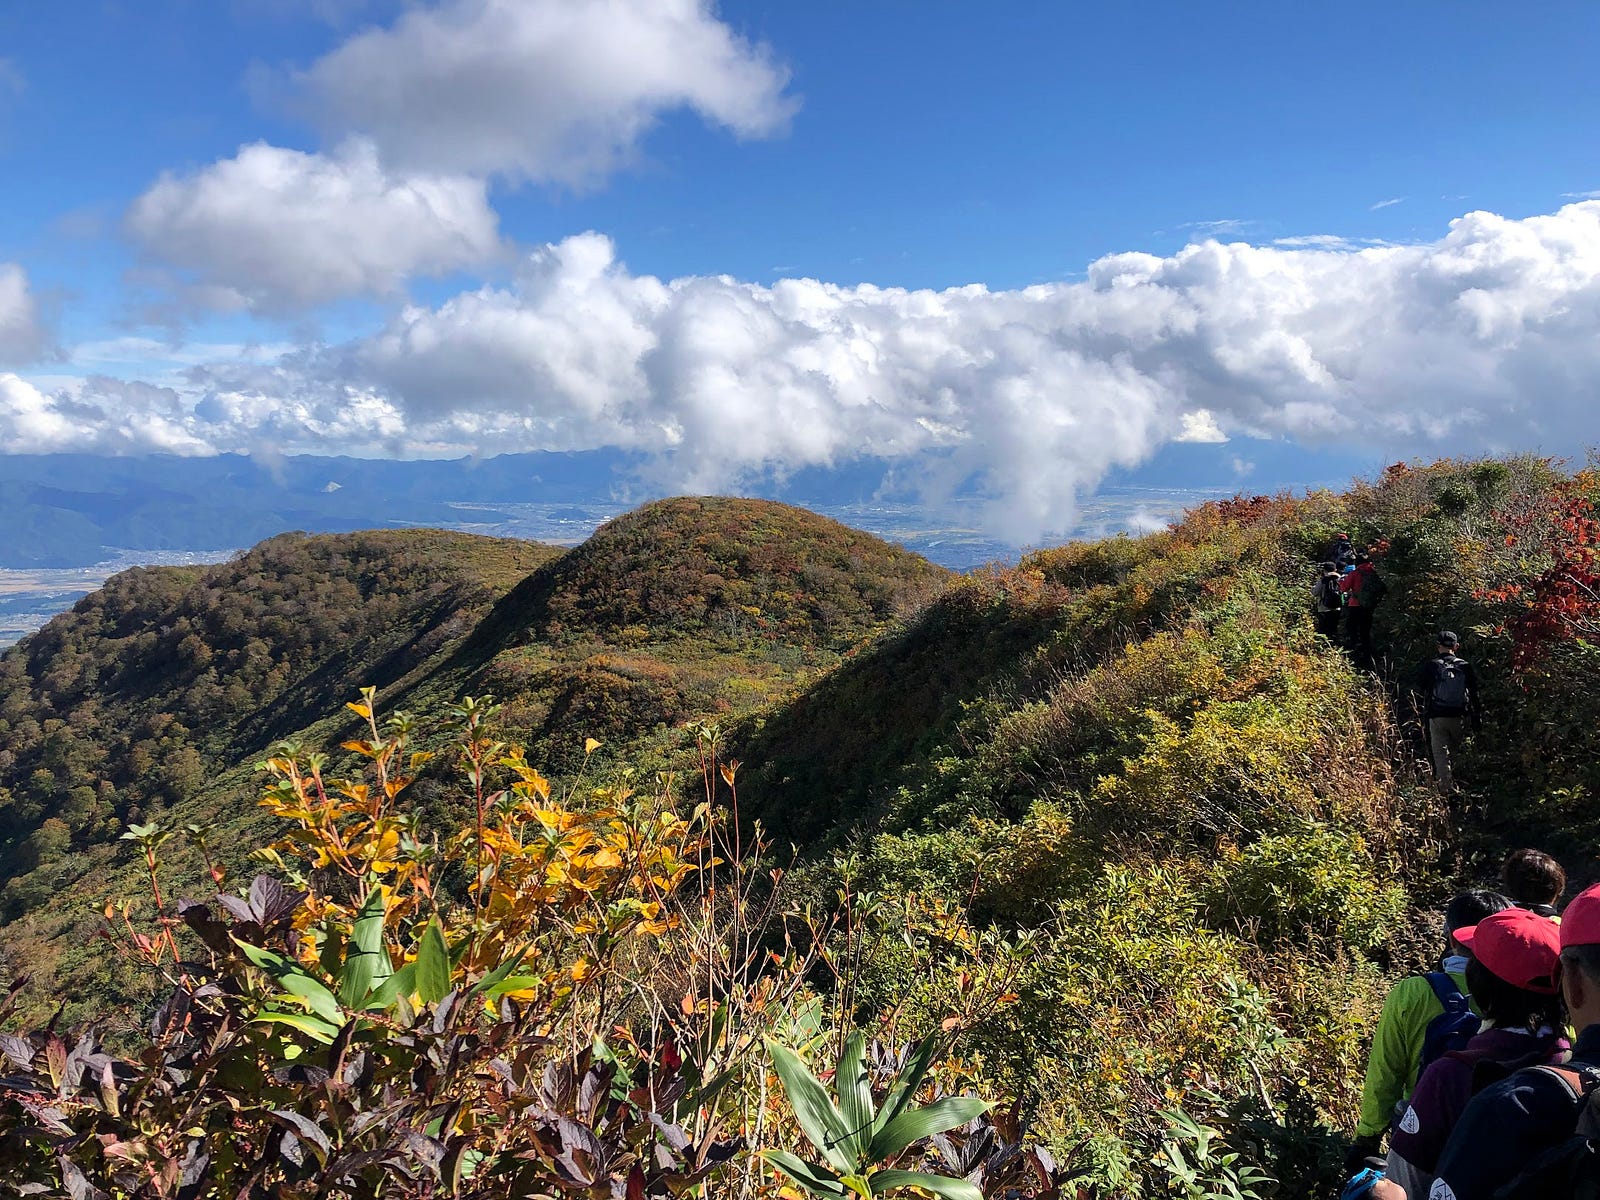 Hikers stare down to the bumpy peaks along the ridge of the extinct volcano that makes up Murayama Ha-yama, blue sky and clouds in the background